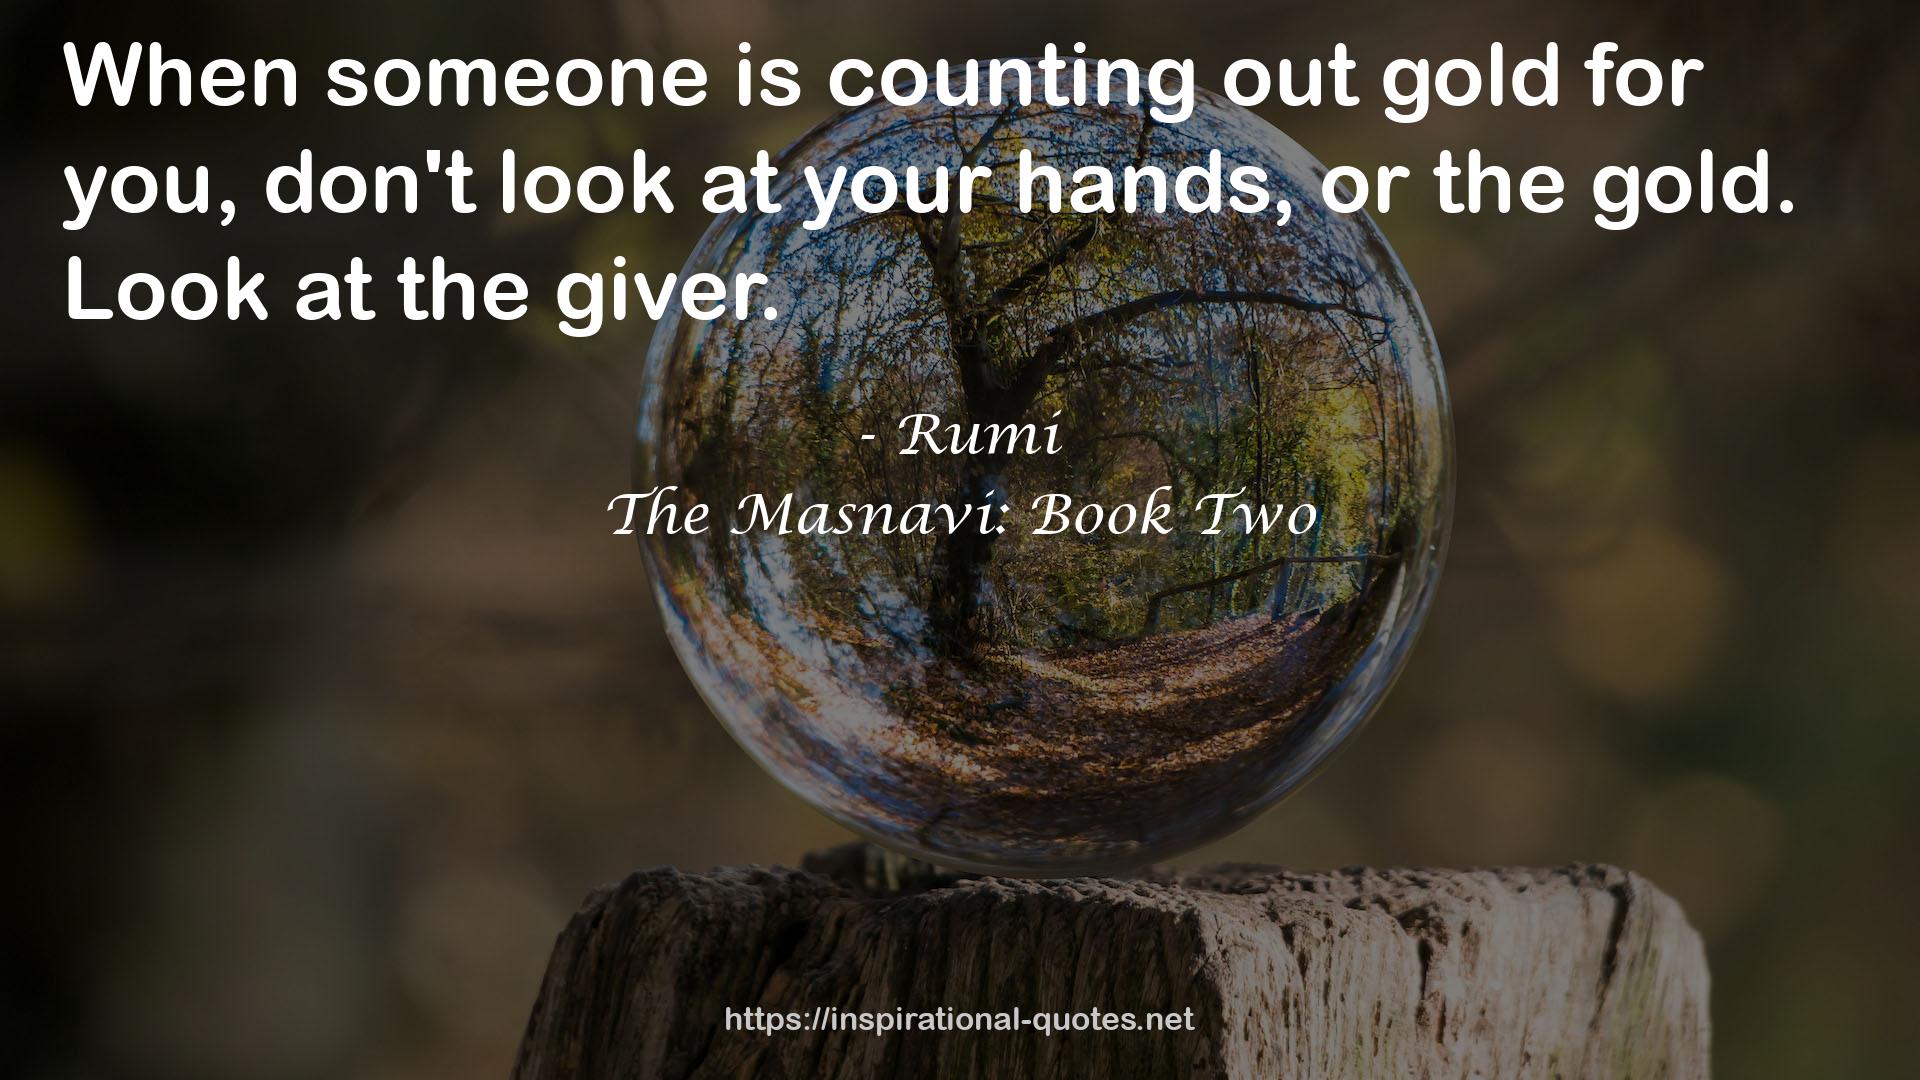 The Masnavi: Book Two QUOTES